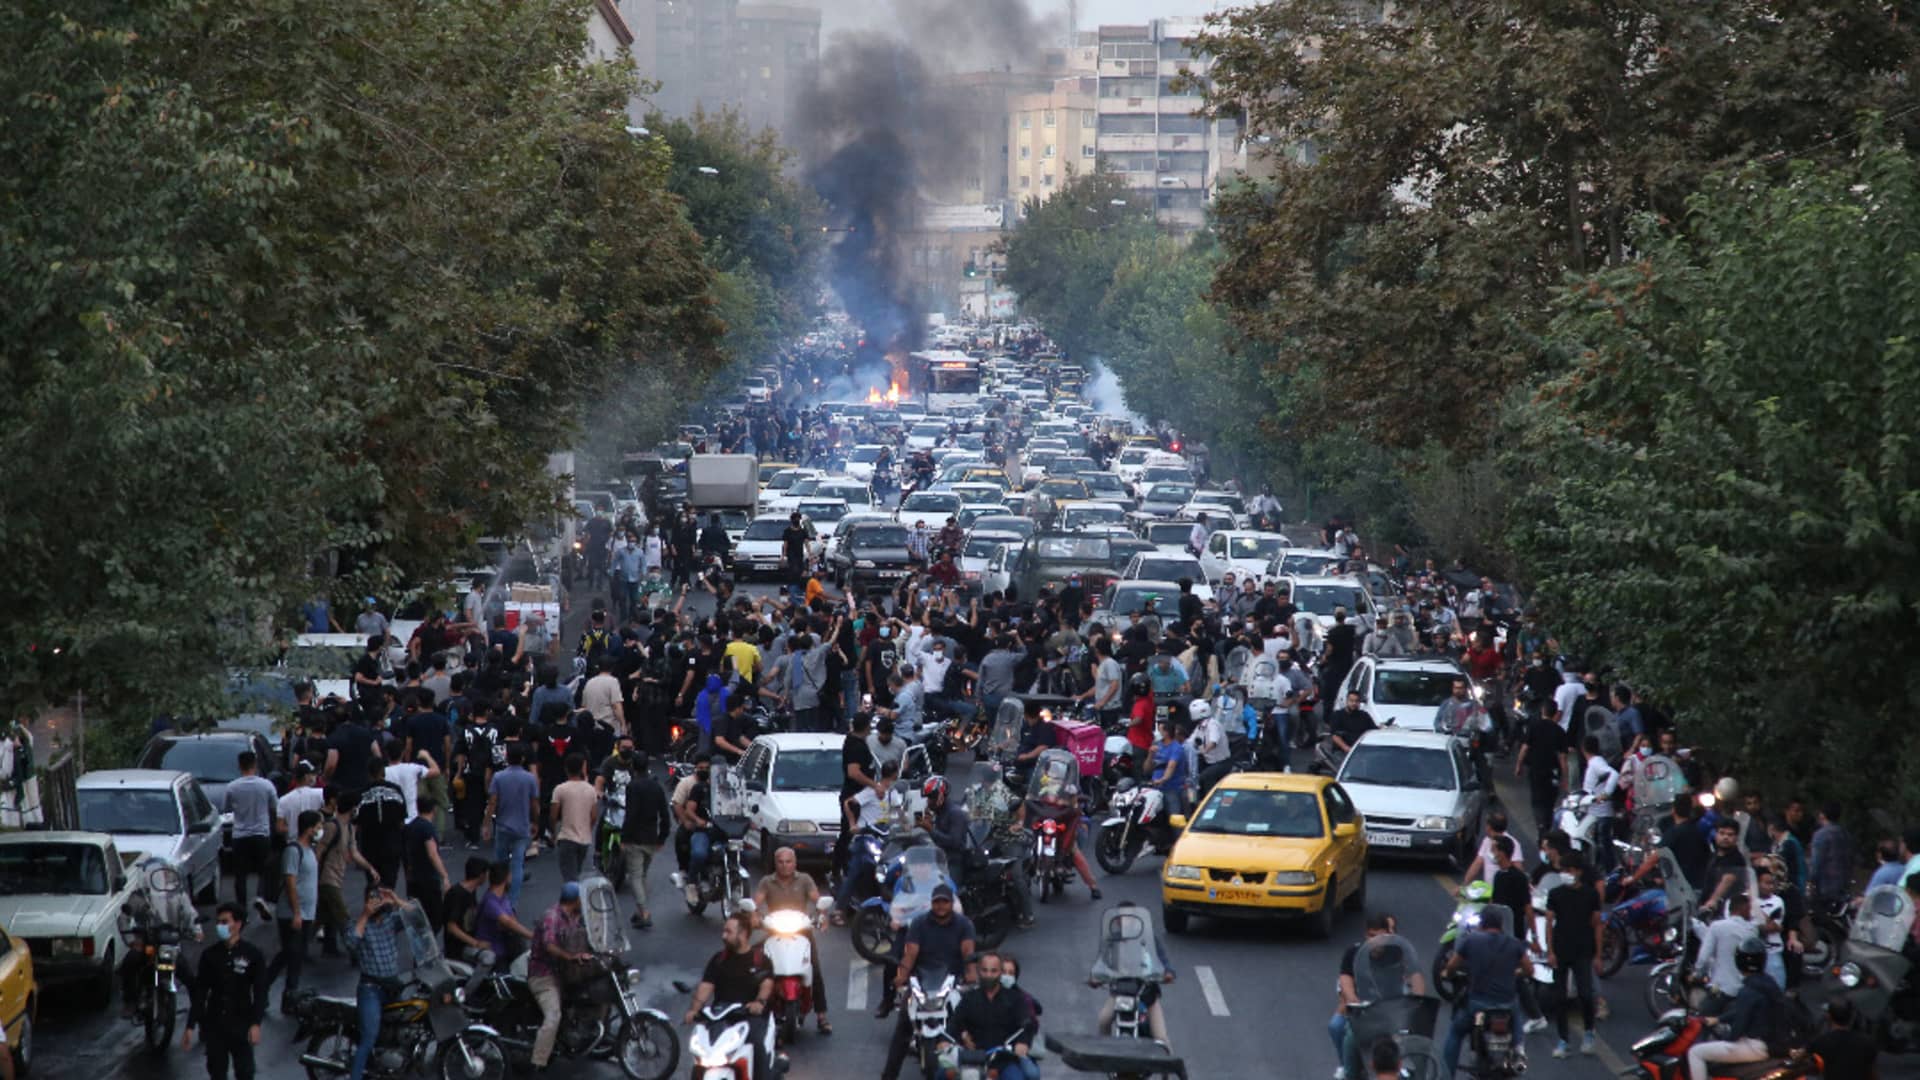 Iranian demonstrators take to the streets of the capital Tehran during a protest for Mahsa Amini on Sept. 21, days after she died in police custody.